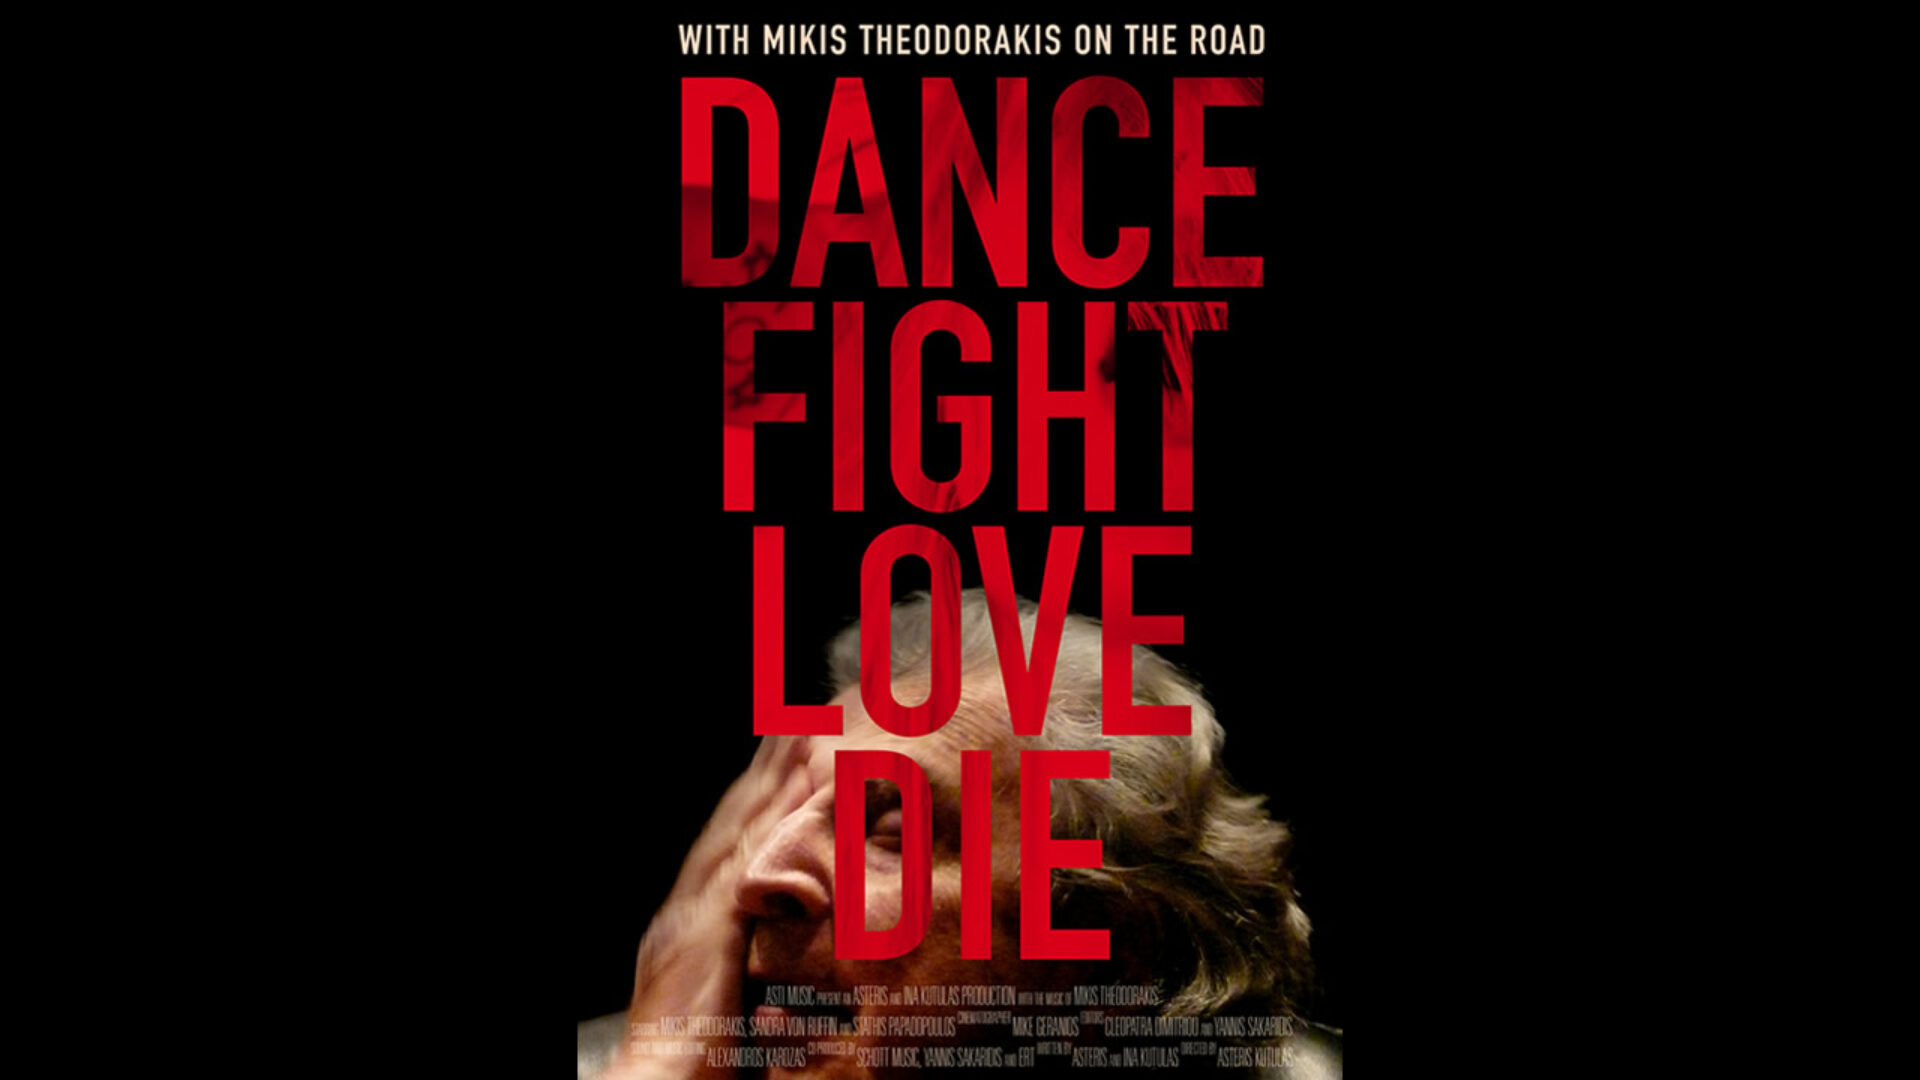 DANCE FIGHT LOVE DIE - WITH MIKIS ON THE ROAD